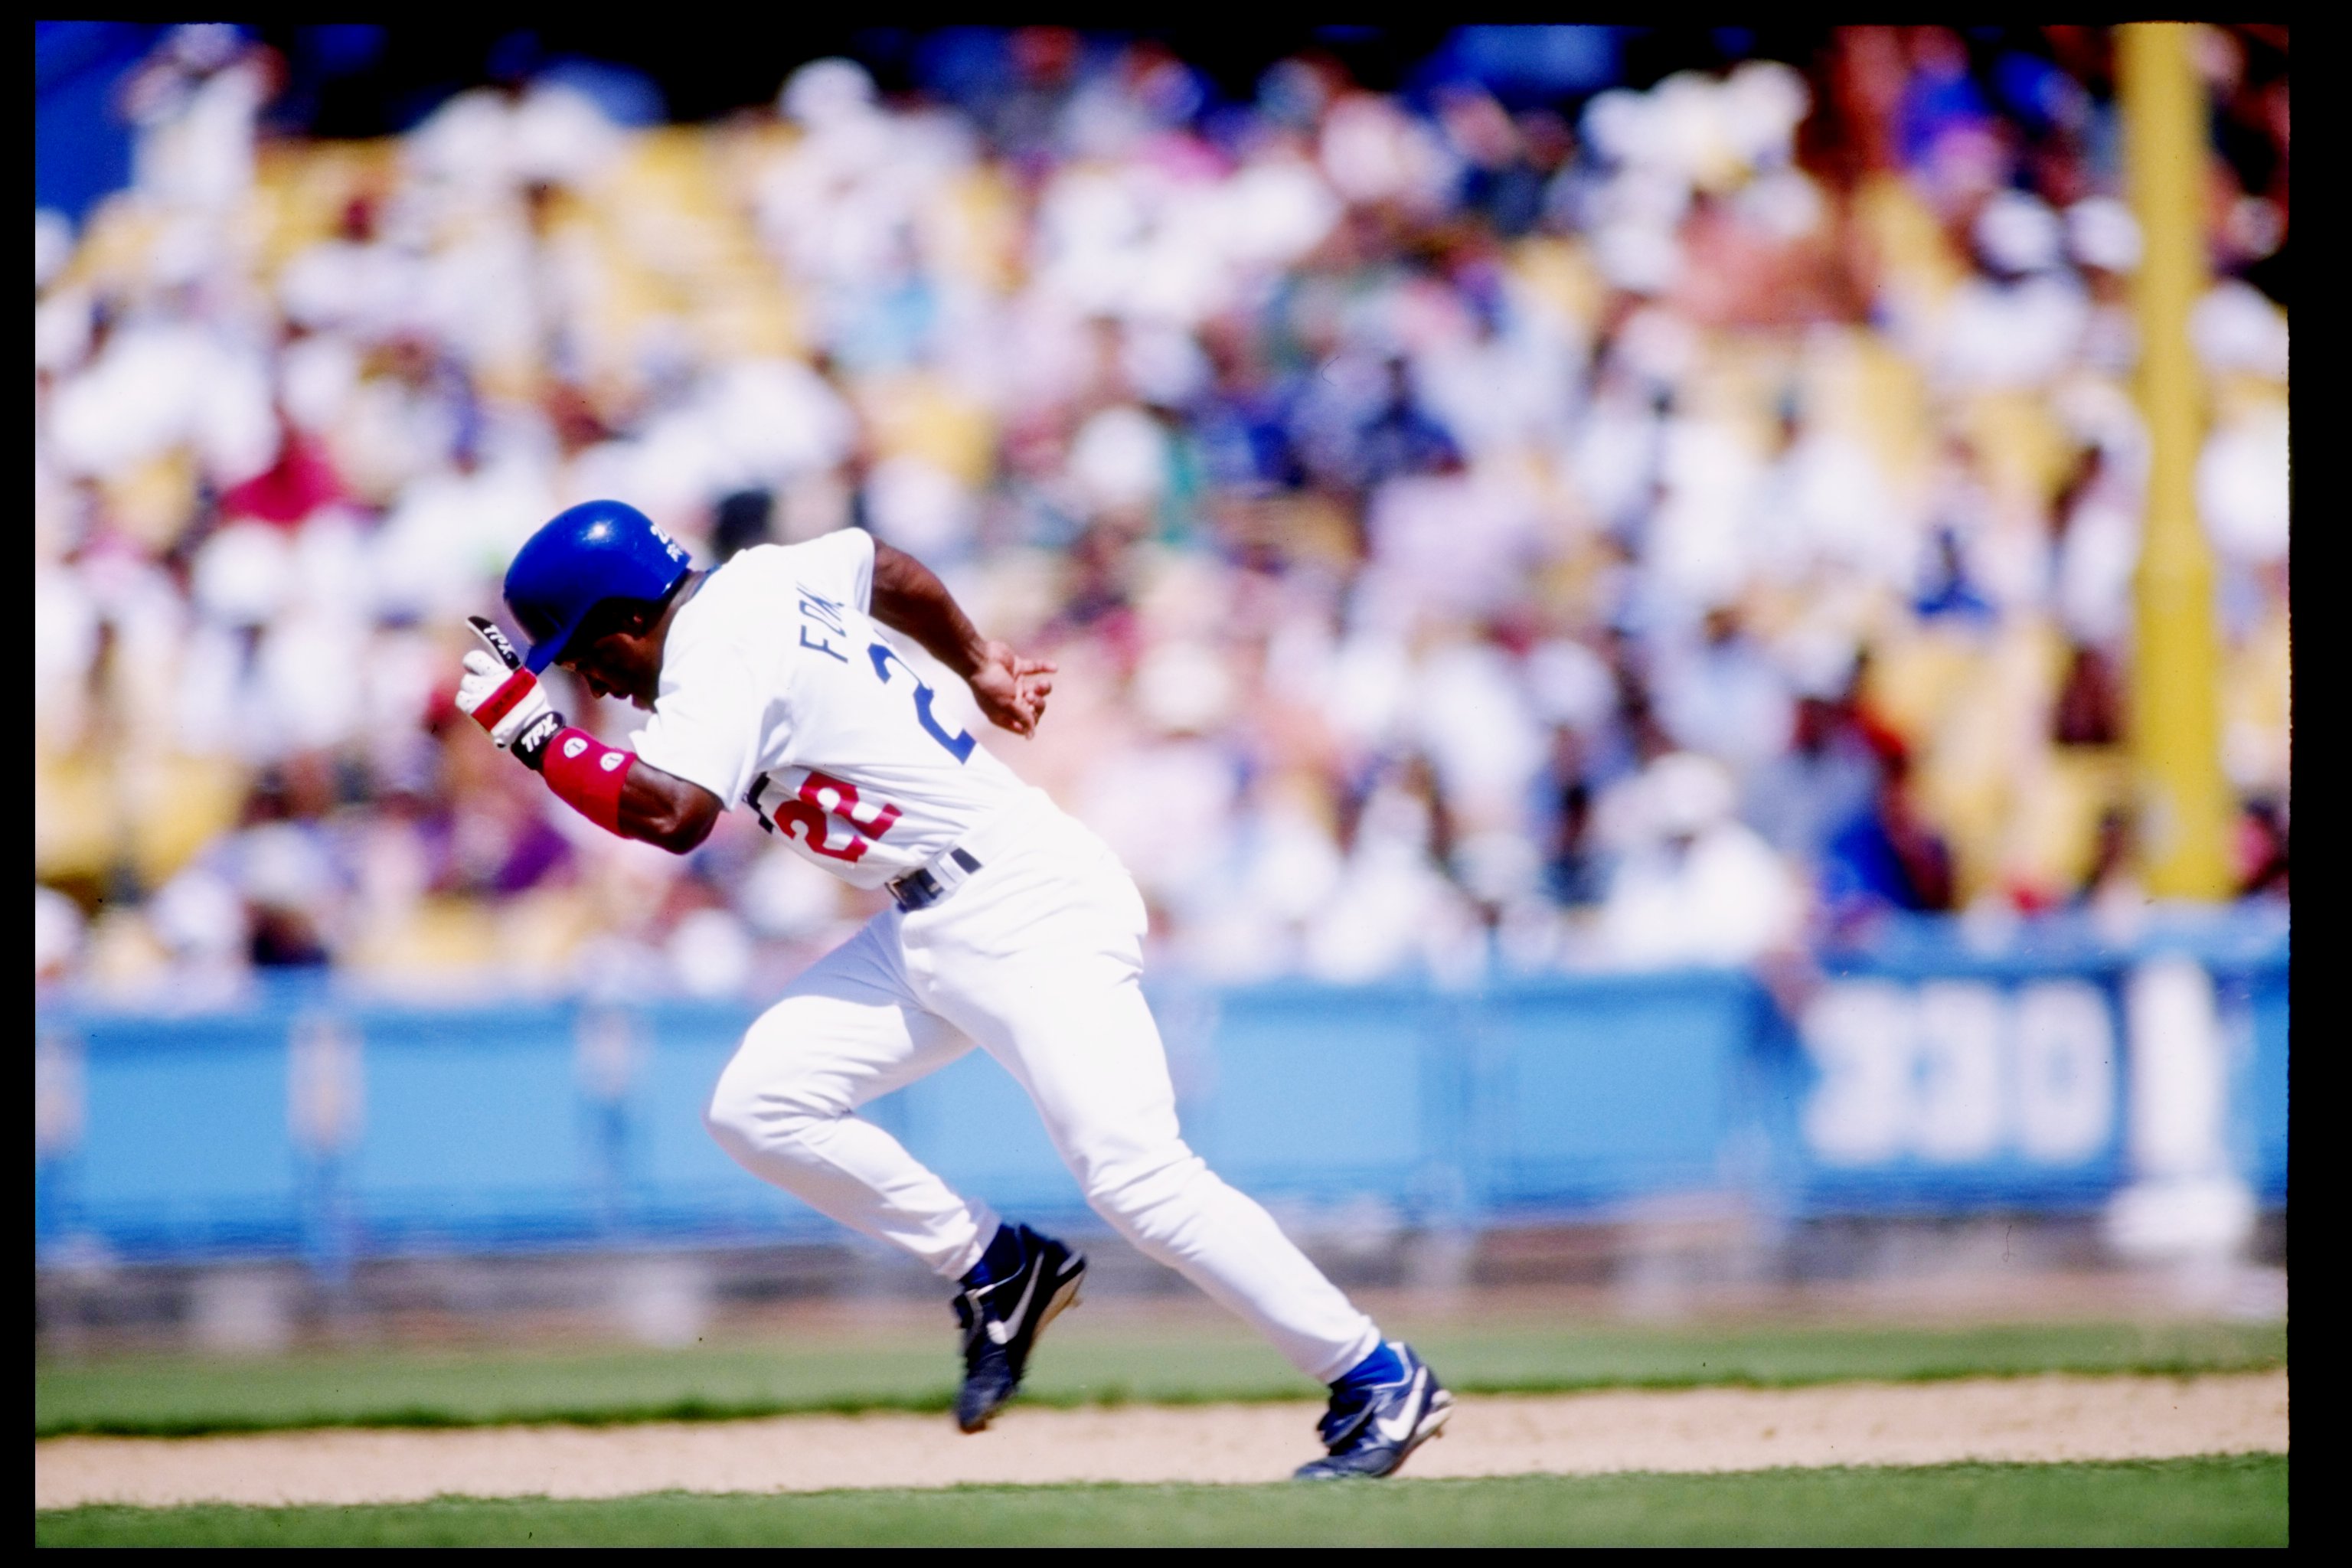 Chad Fonville hit .276 with 42 infield hits and 20 stolen bases for the 1995 Dodgers, filling in for extended periods of time at second base, left field, and shortstop.